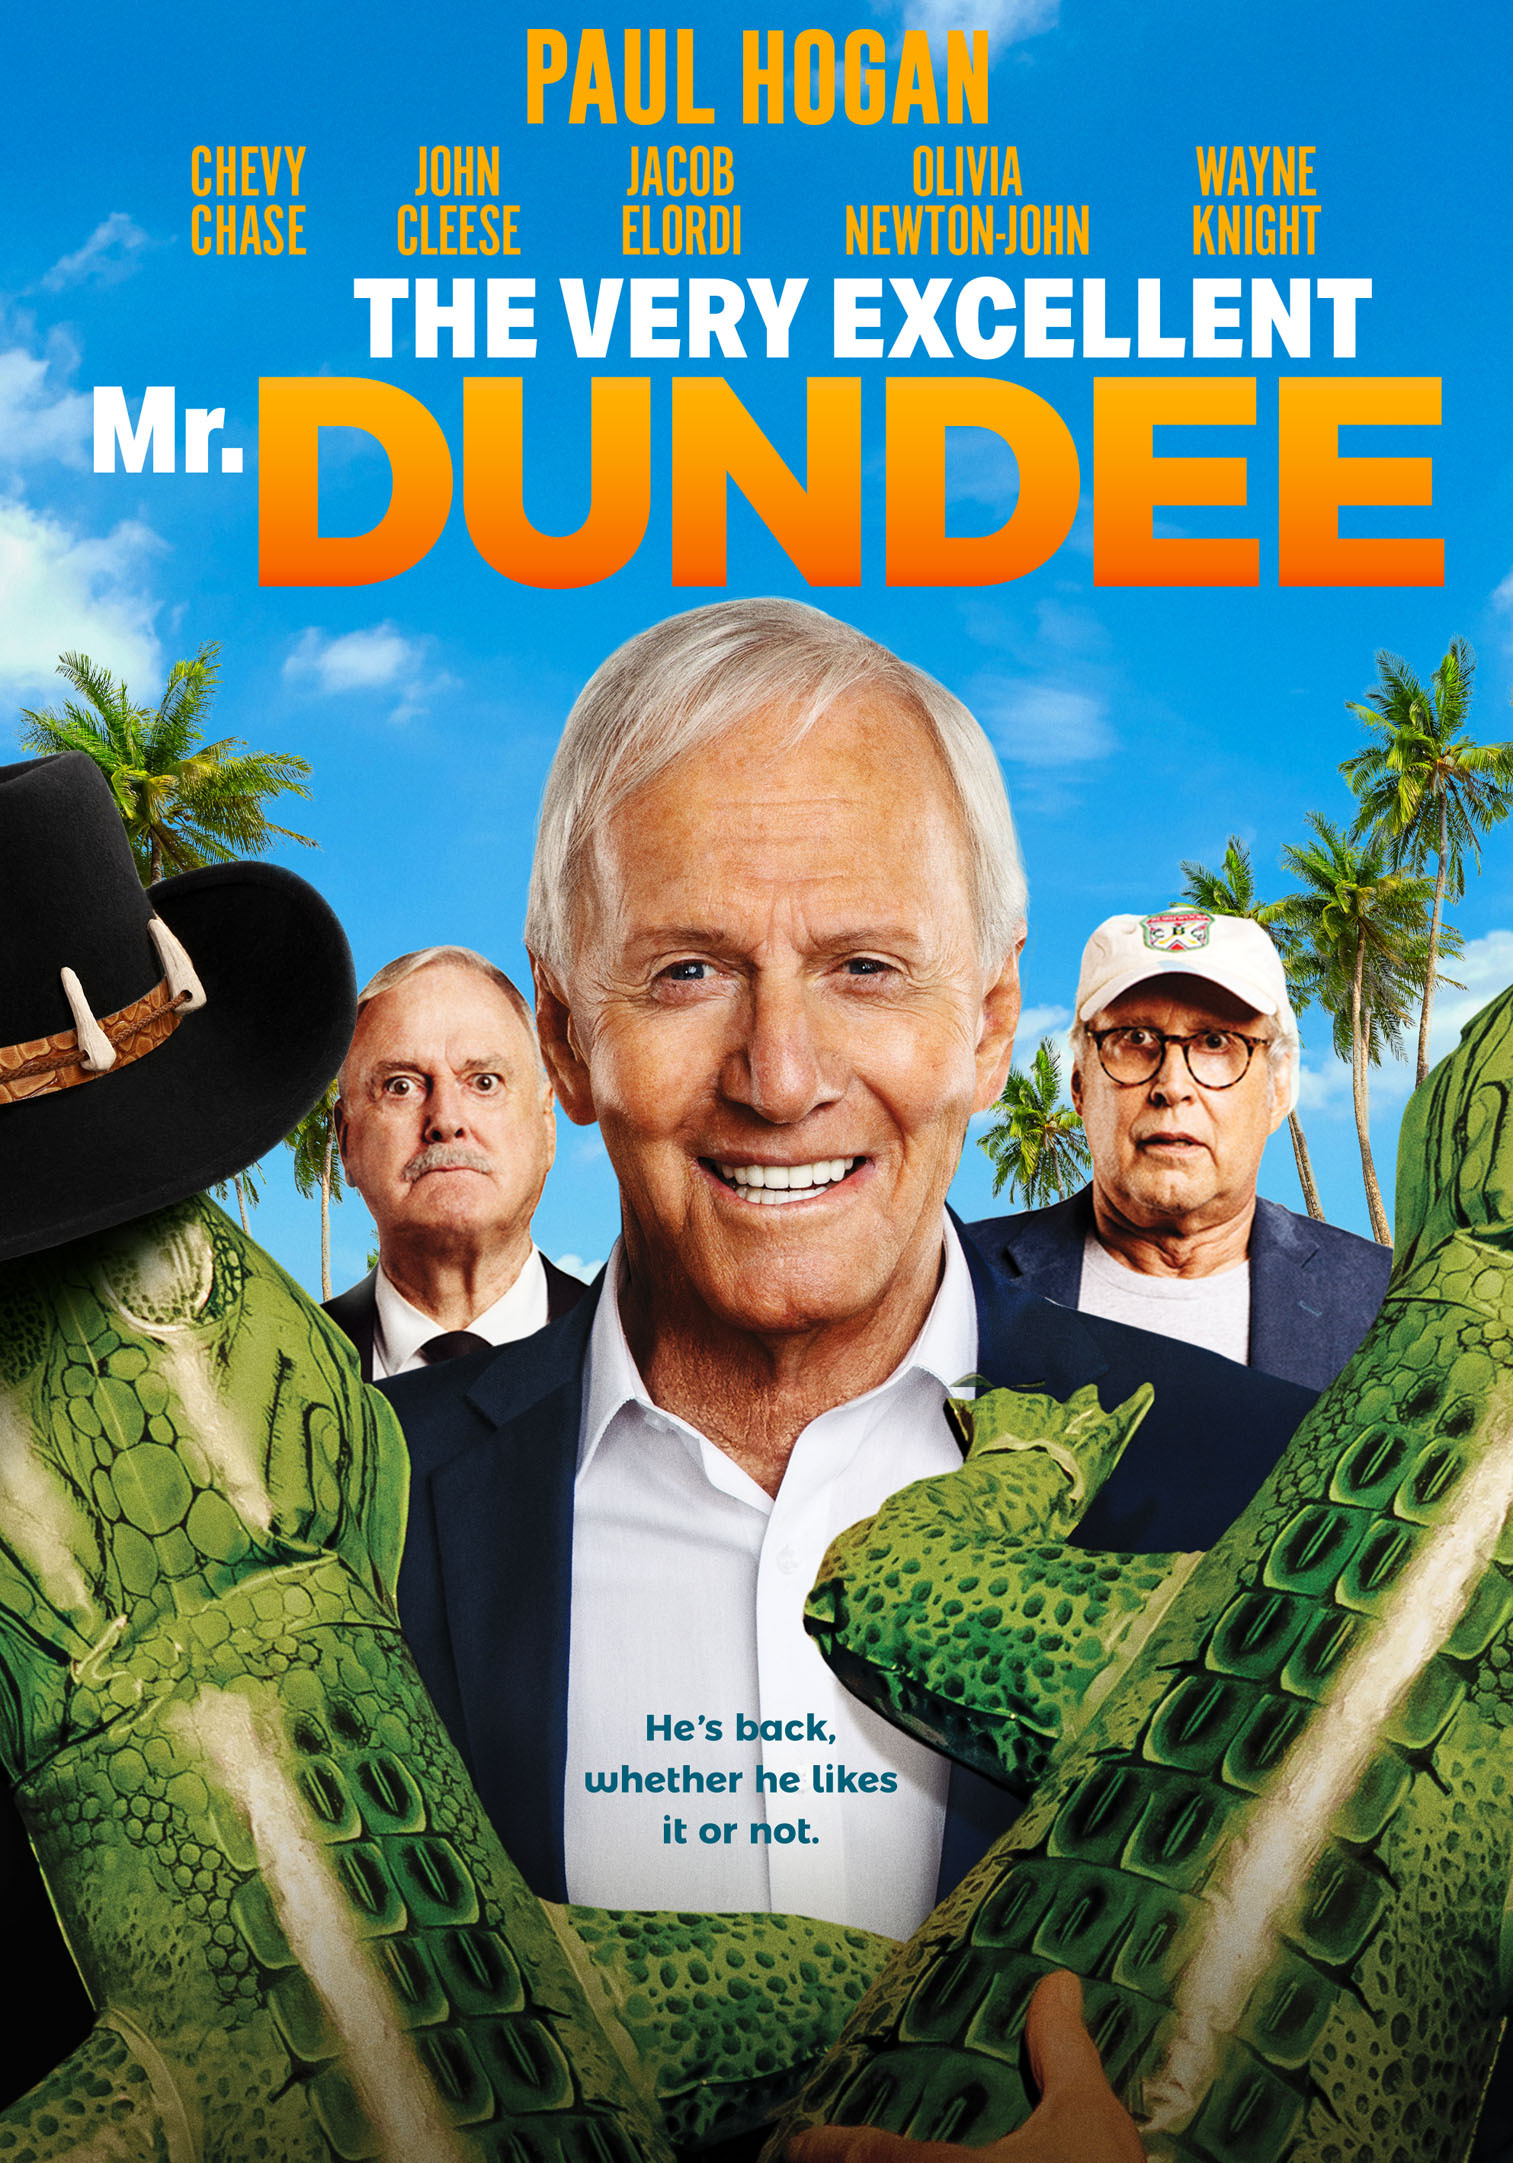 The Very Excellent Mr. Dundee - DVD [ 2020 ]  - Comedy Movies On DVD - Movies On GRUV